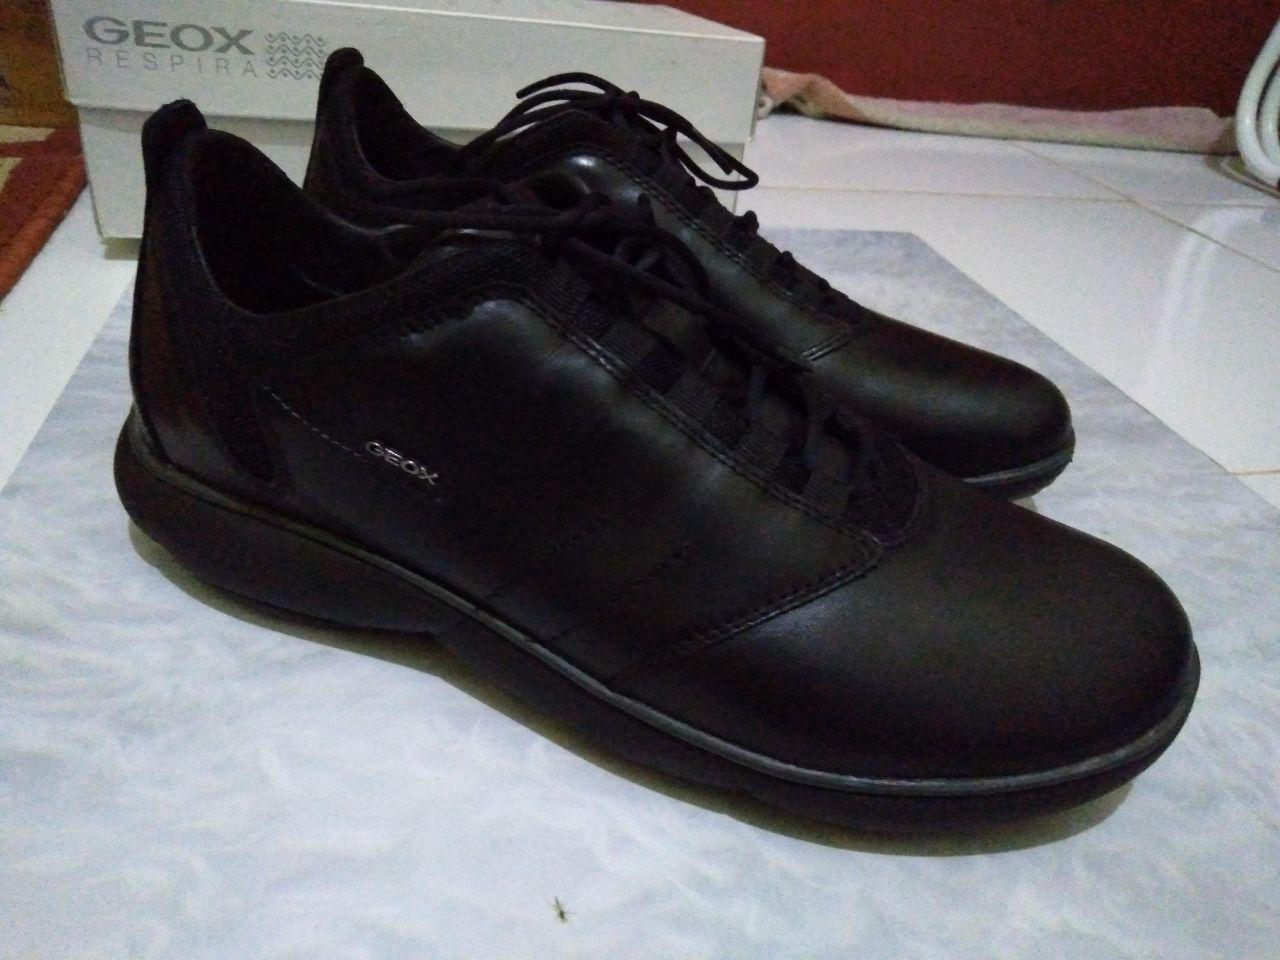 Shop - geox shoes harga - OFF 70% - We 